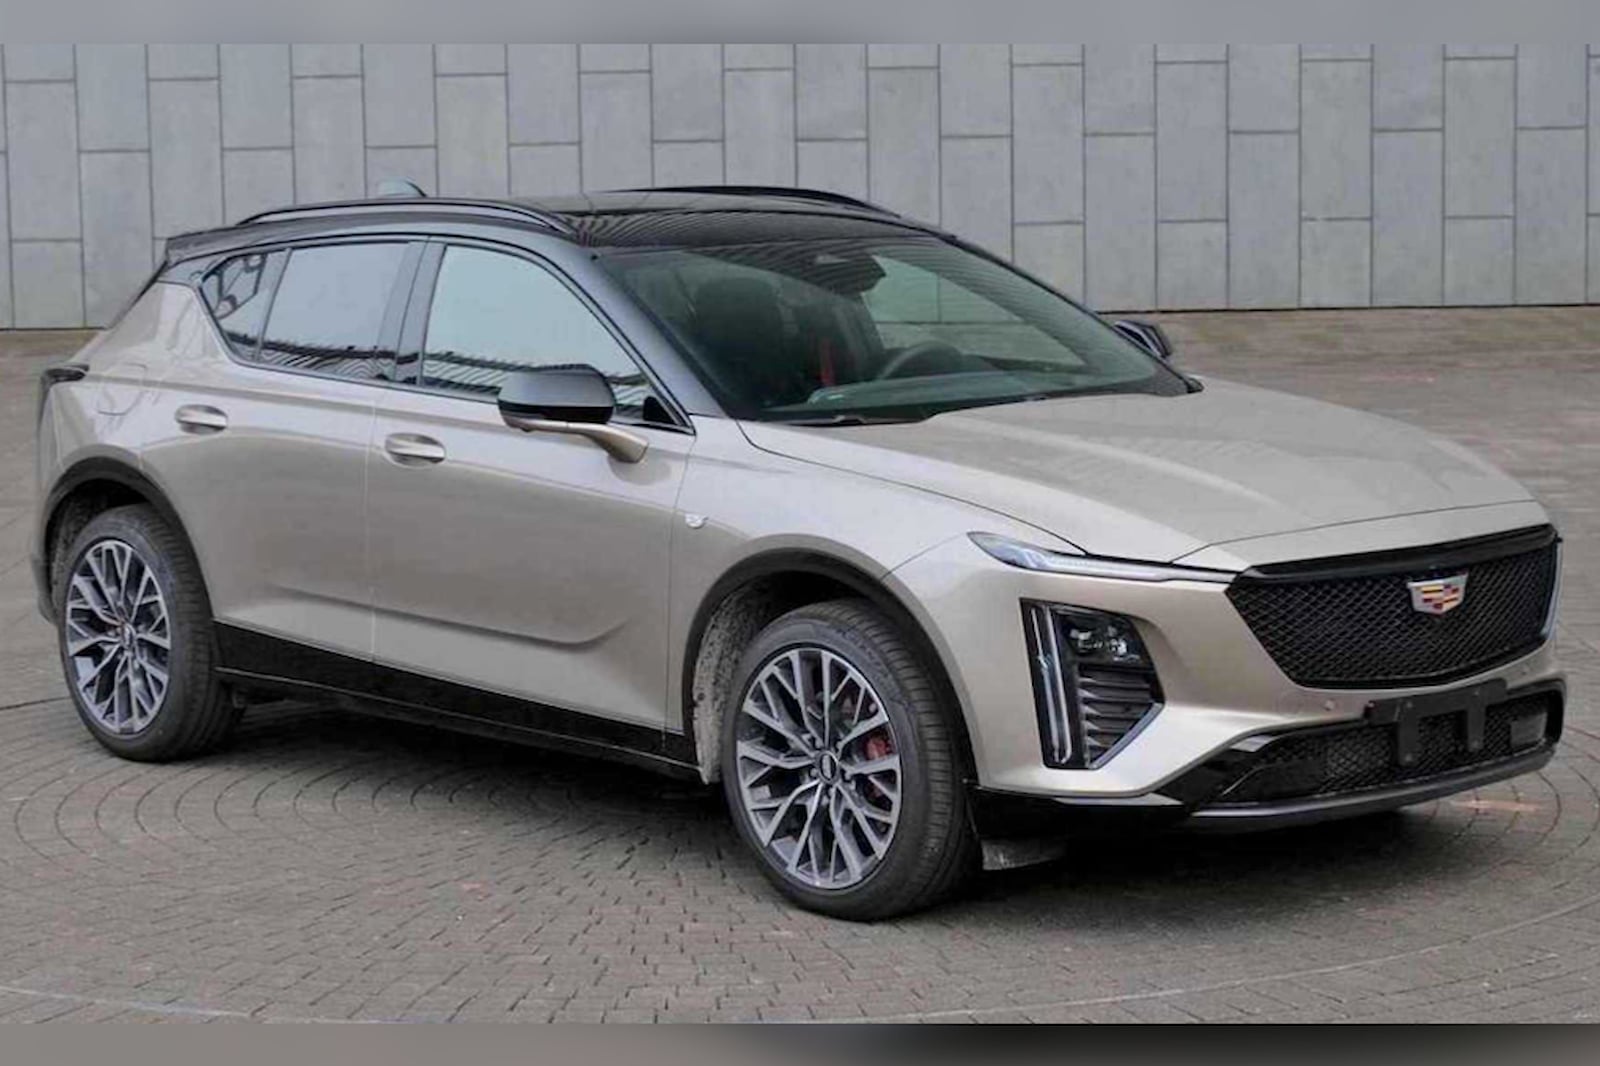 Attractive New Cadillac GT4 SUV Revealed In Leaked Images